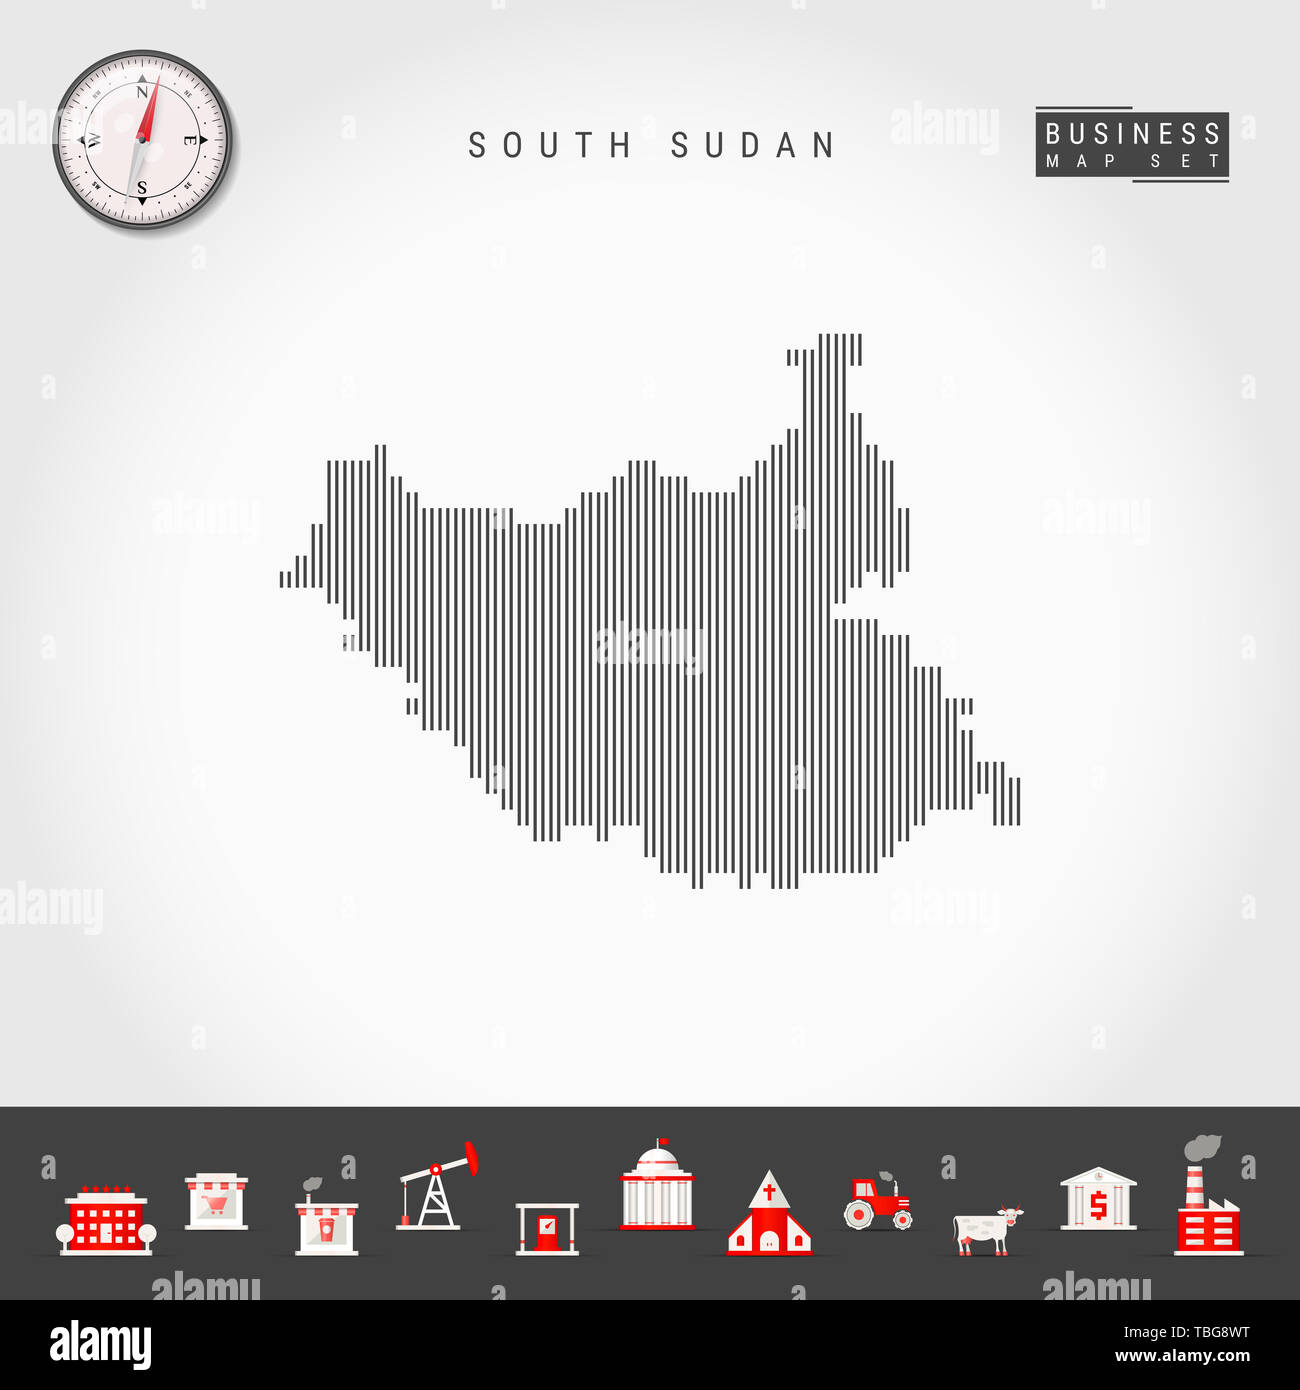 Vertical Lines Pattern Map of South Sudan. Striped Simple Silhouette of South Sudan. Realistic Compass. Business Infographic Icons. Stock Photo